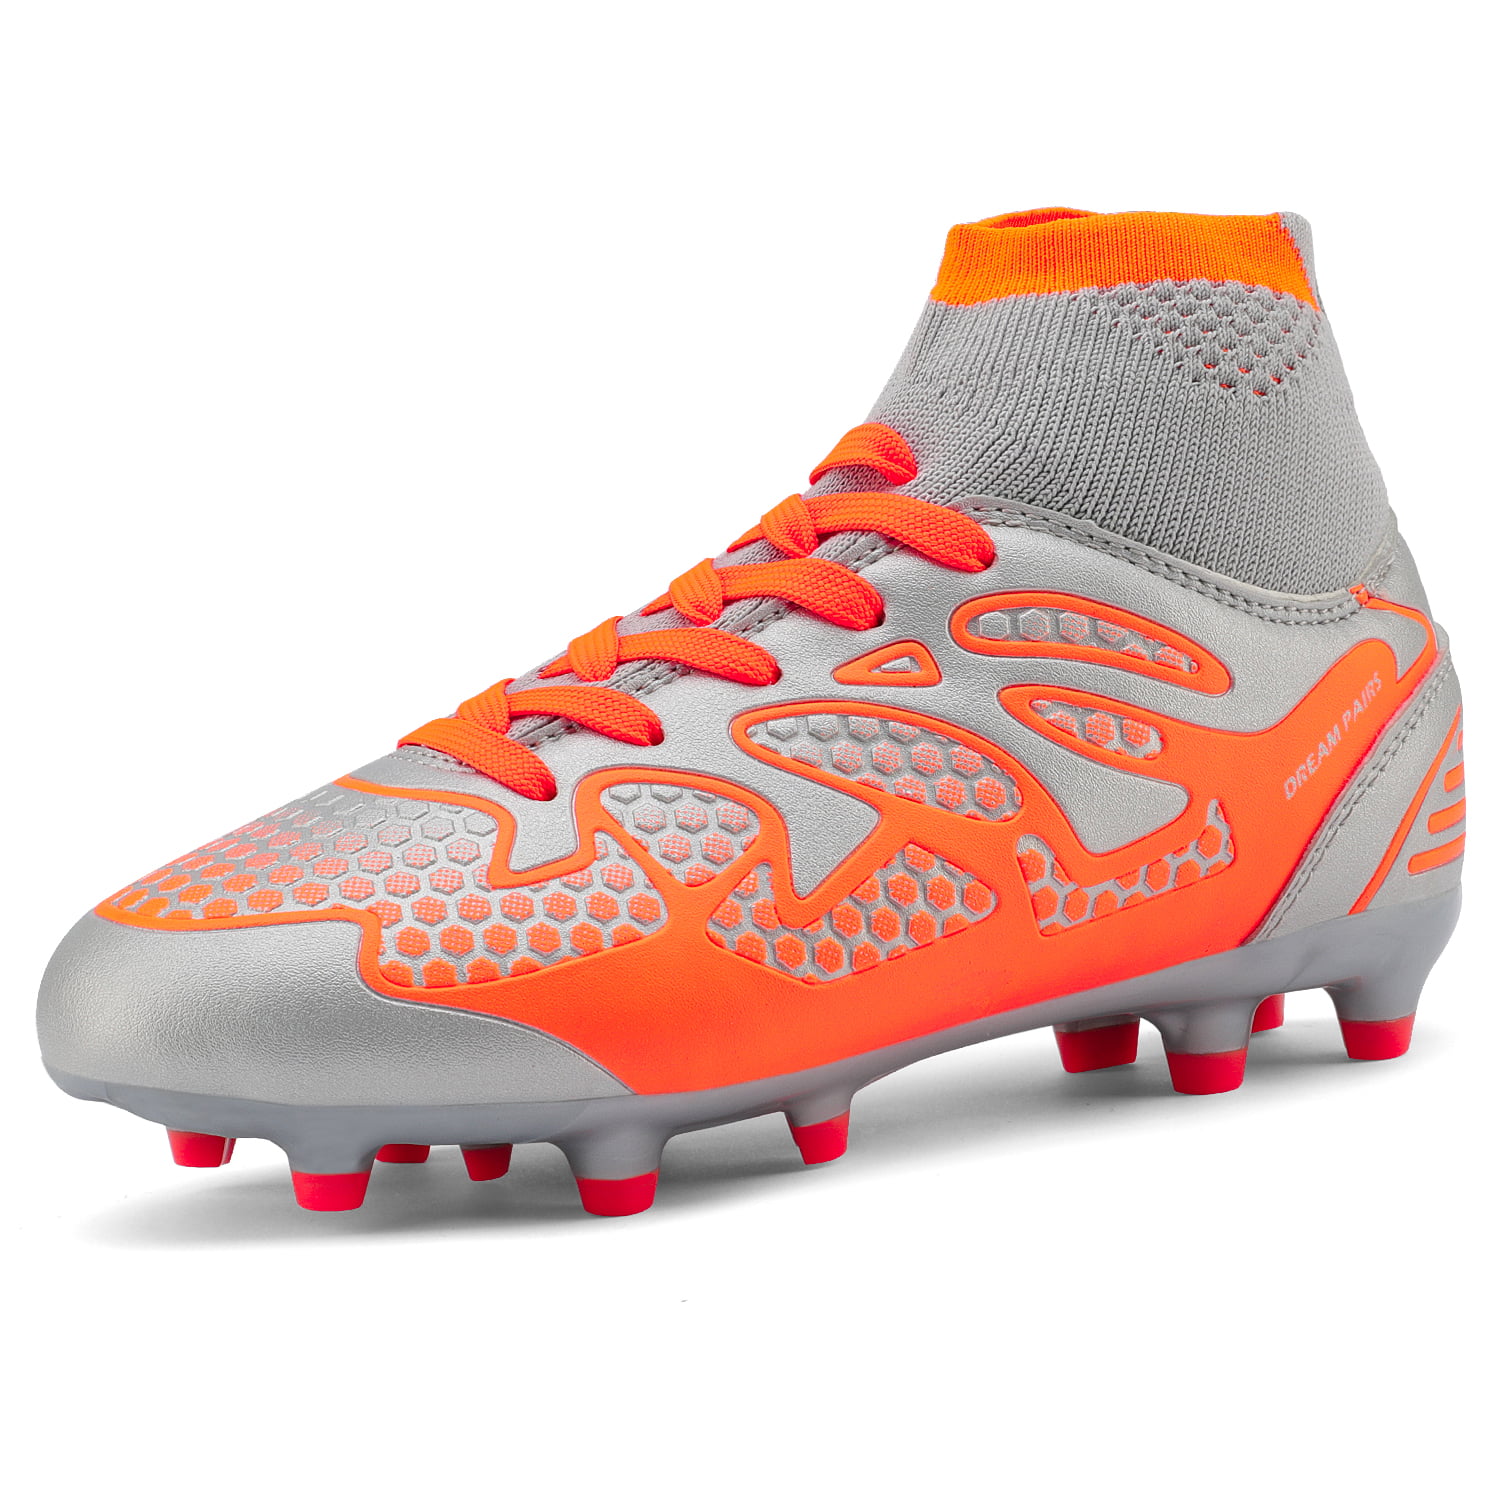 DREAM PAIRS Boys Girls Outdoor Soccer Cleats Football Shoes 